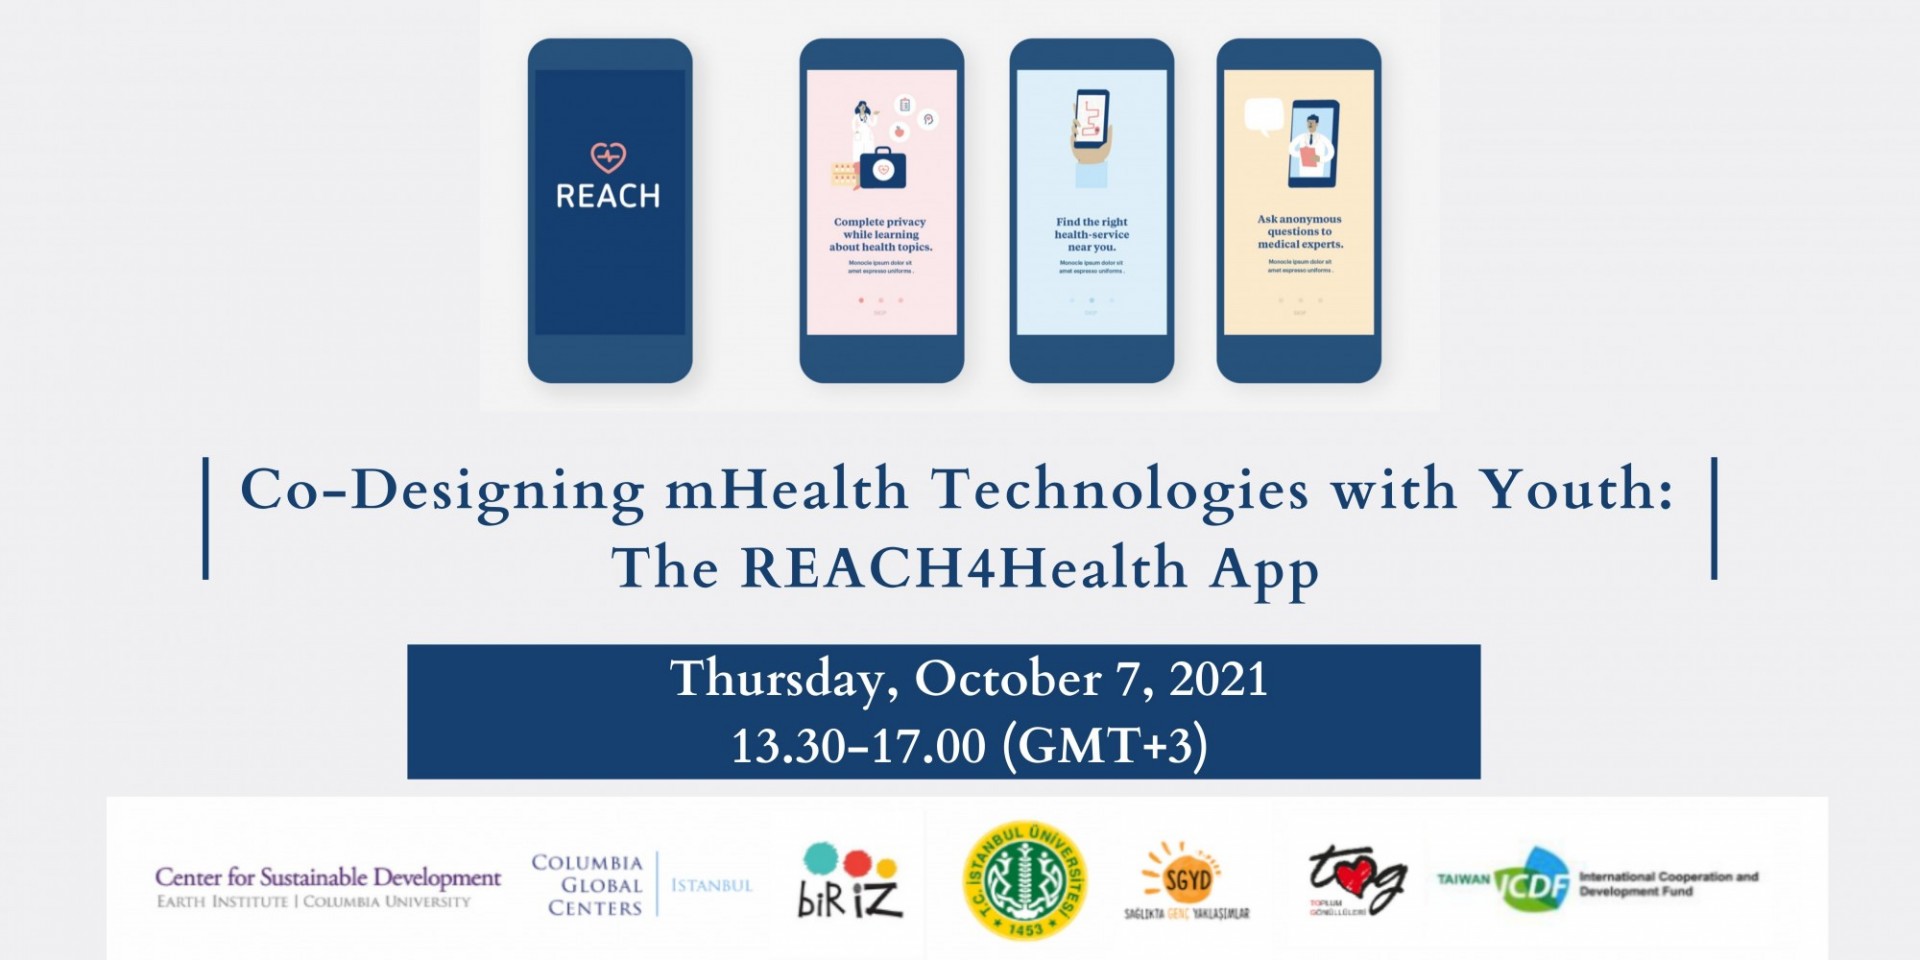 Co-Designing mHealth Technologies with Youth: 
The REACH4Health App